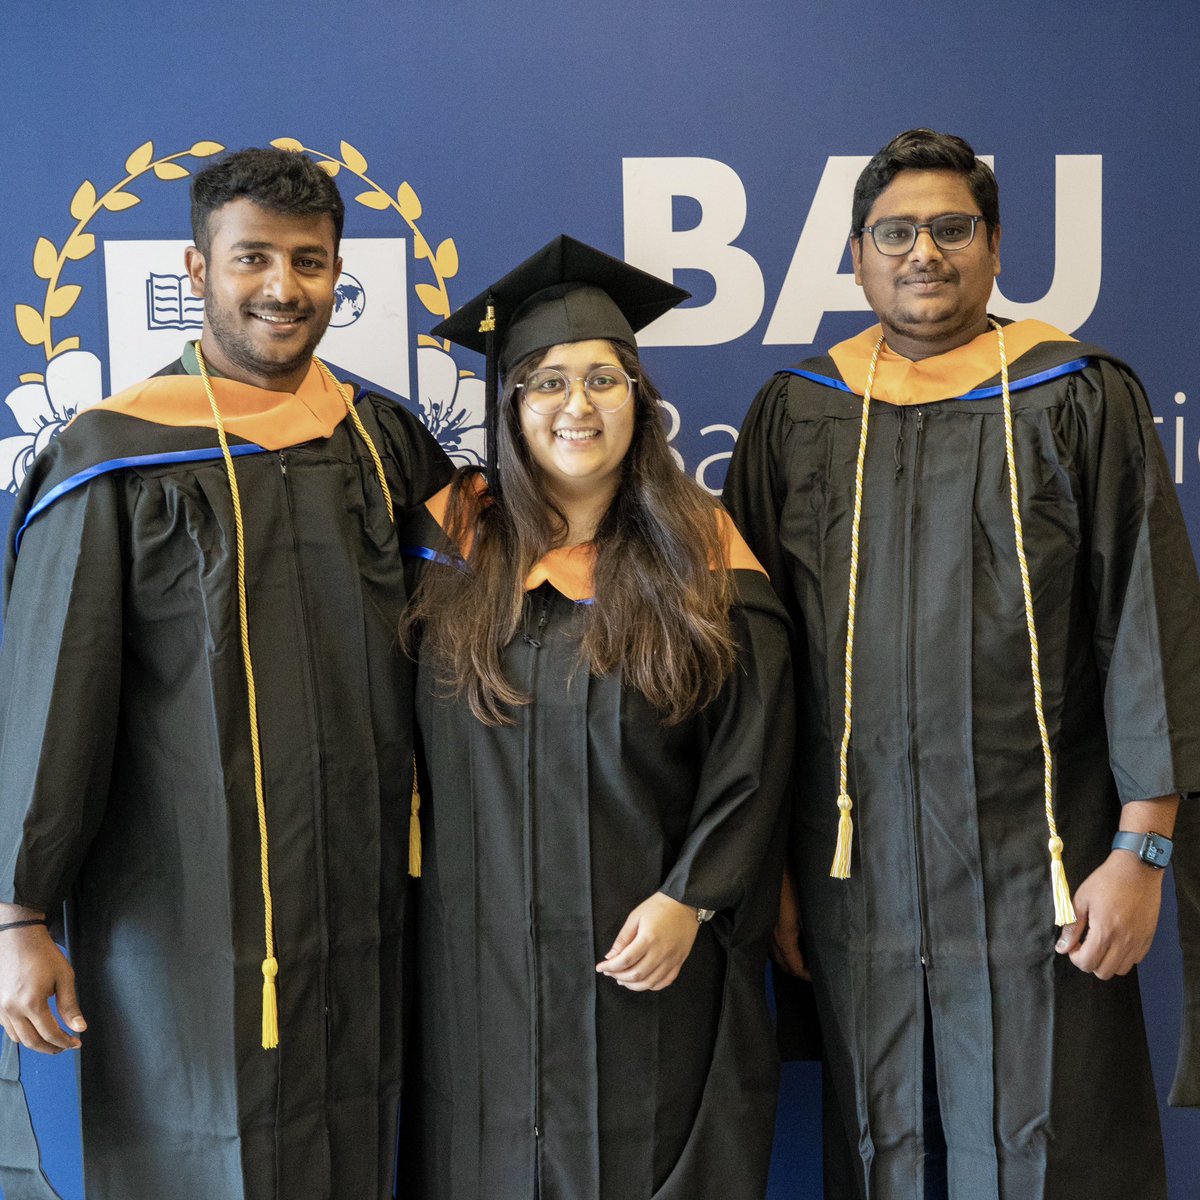 🕐 Just four days to go until we step across the stage at BAU’s Graduation Ceremony 2024! 🎓✨ As we count down these final moments, let’s take a minute to celebrate the incredible bonds we’ve built. #BAUGrad2024 #ForeverFriends #DARETODREAM